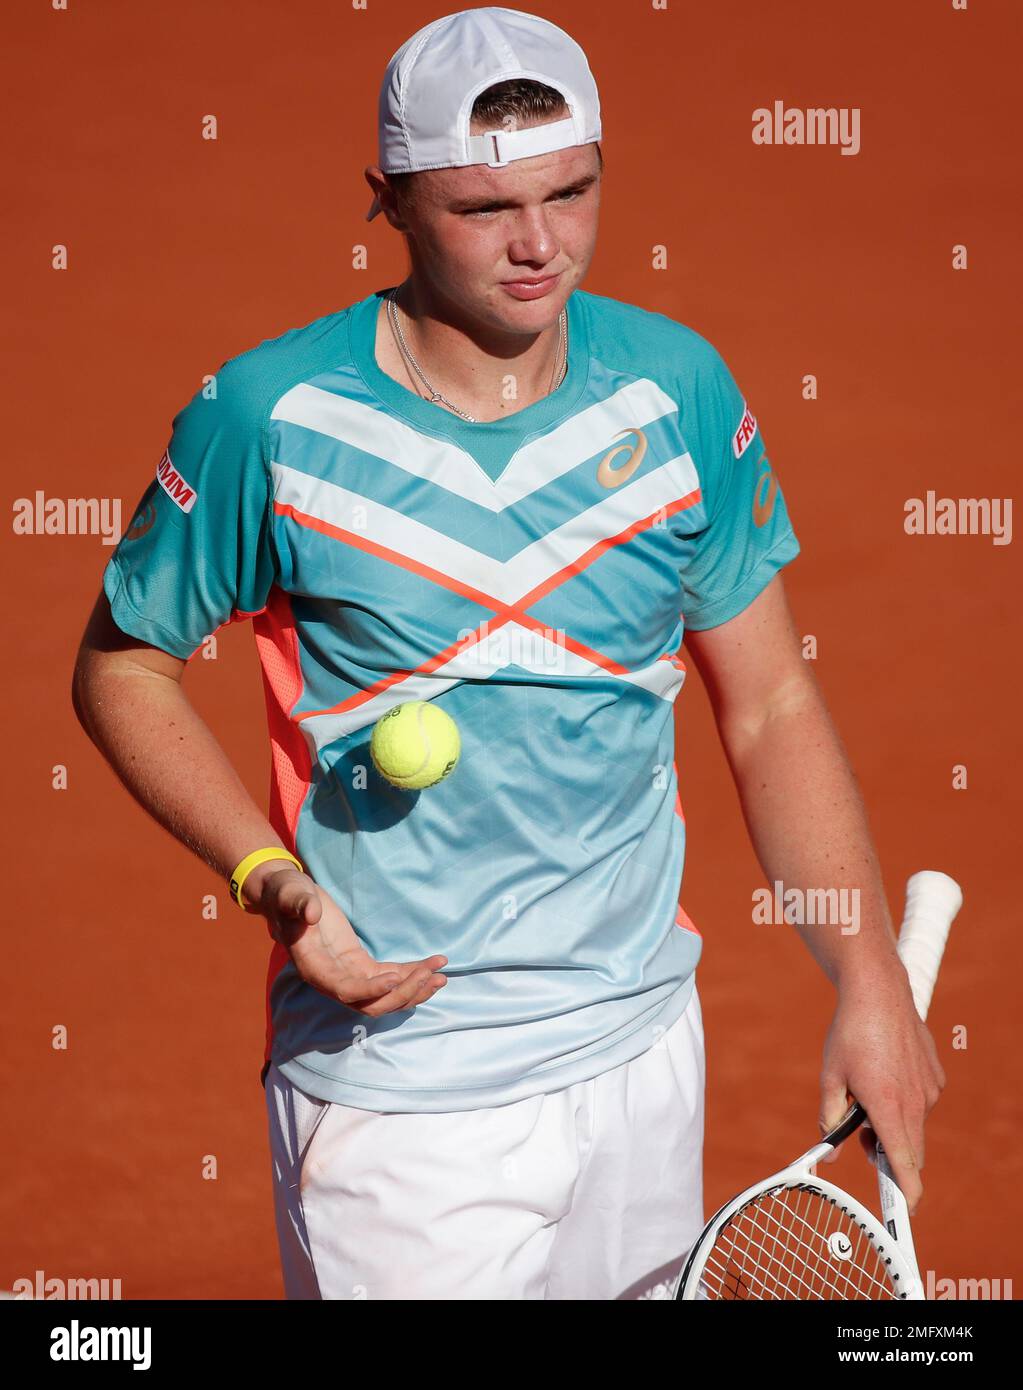 Switzerlands Dominic Stephan Stricker serves against Switzerlands Leandro Riedi in the junior mens final match of the French Open tennis tournament at the Roland Garros stadium in Paris, France, Saturday, Oct